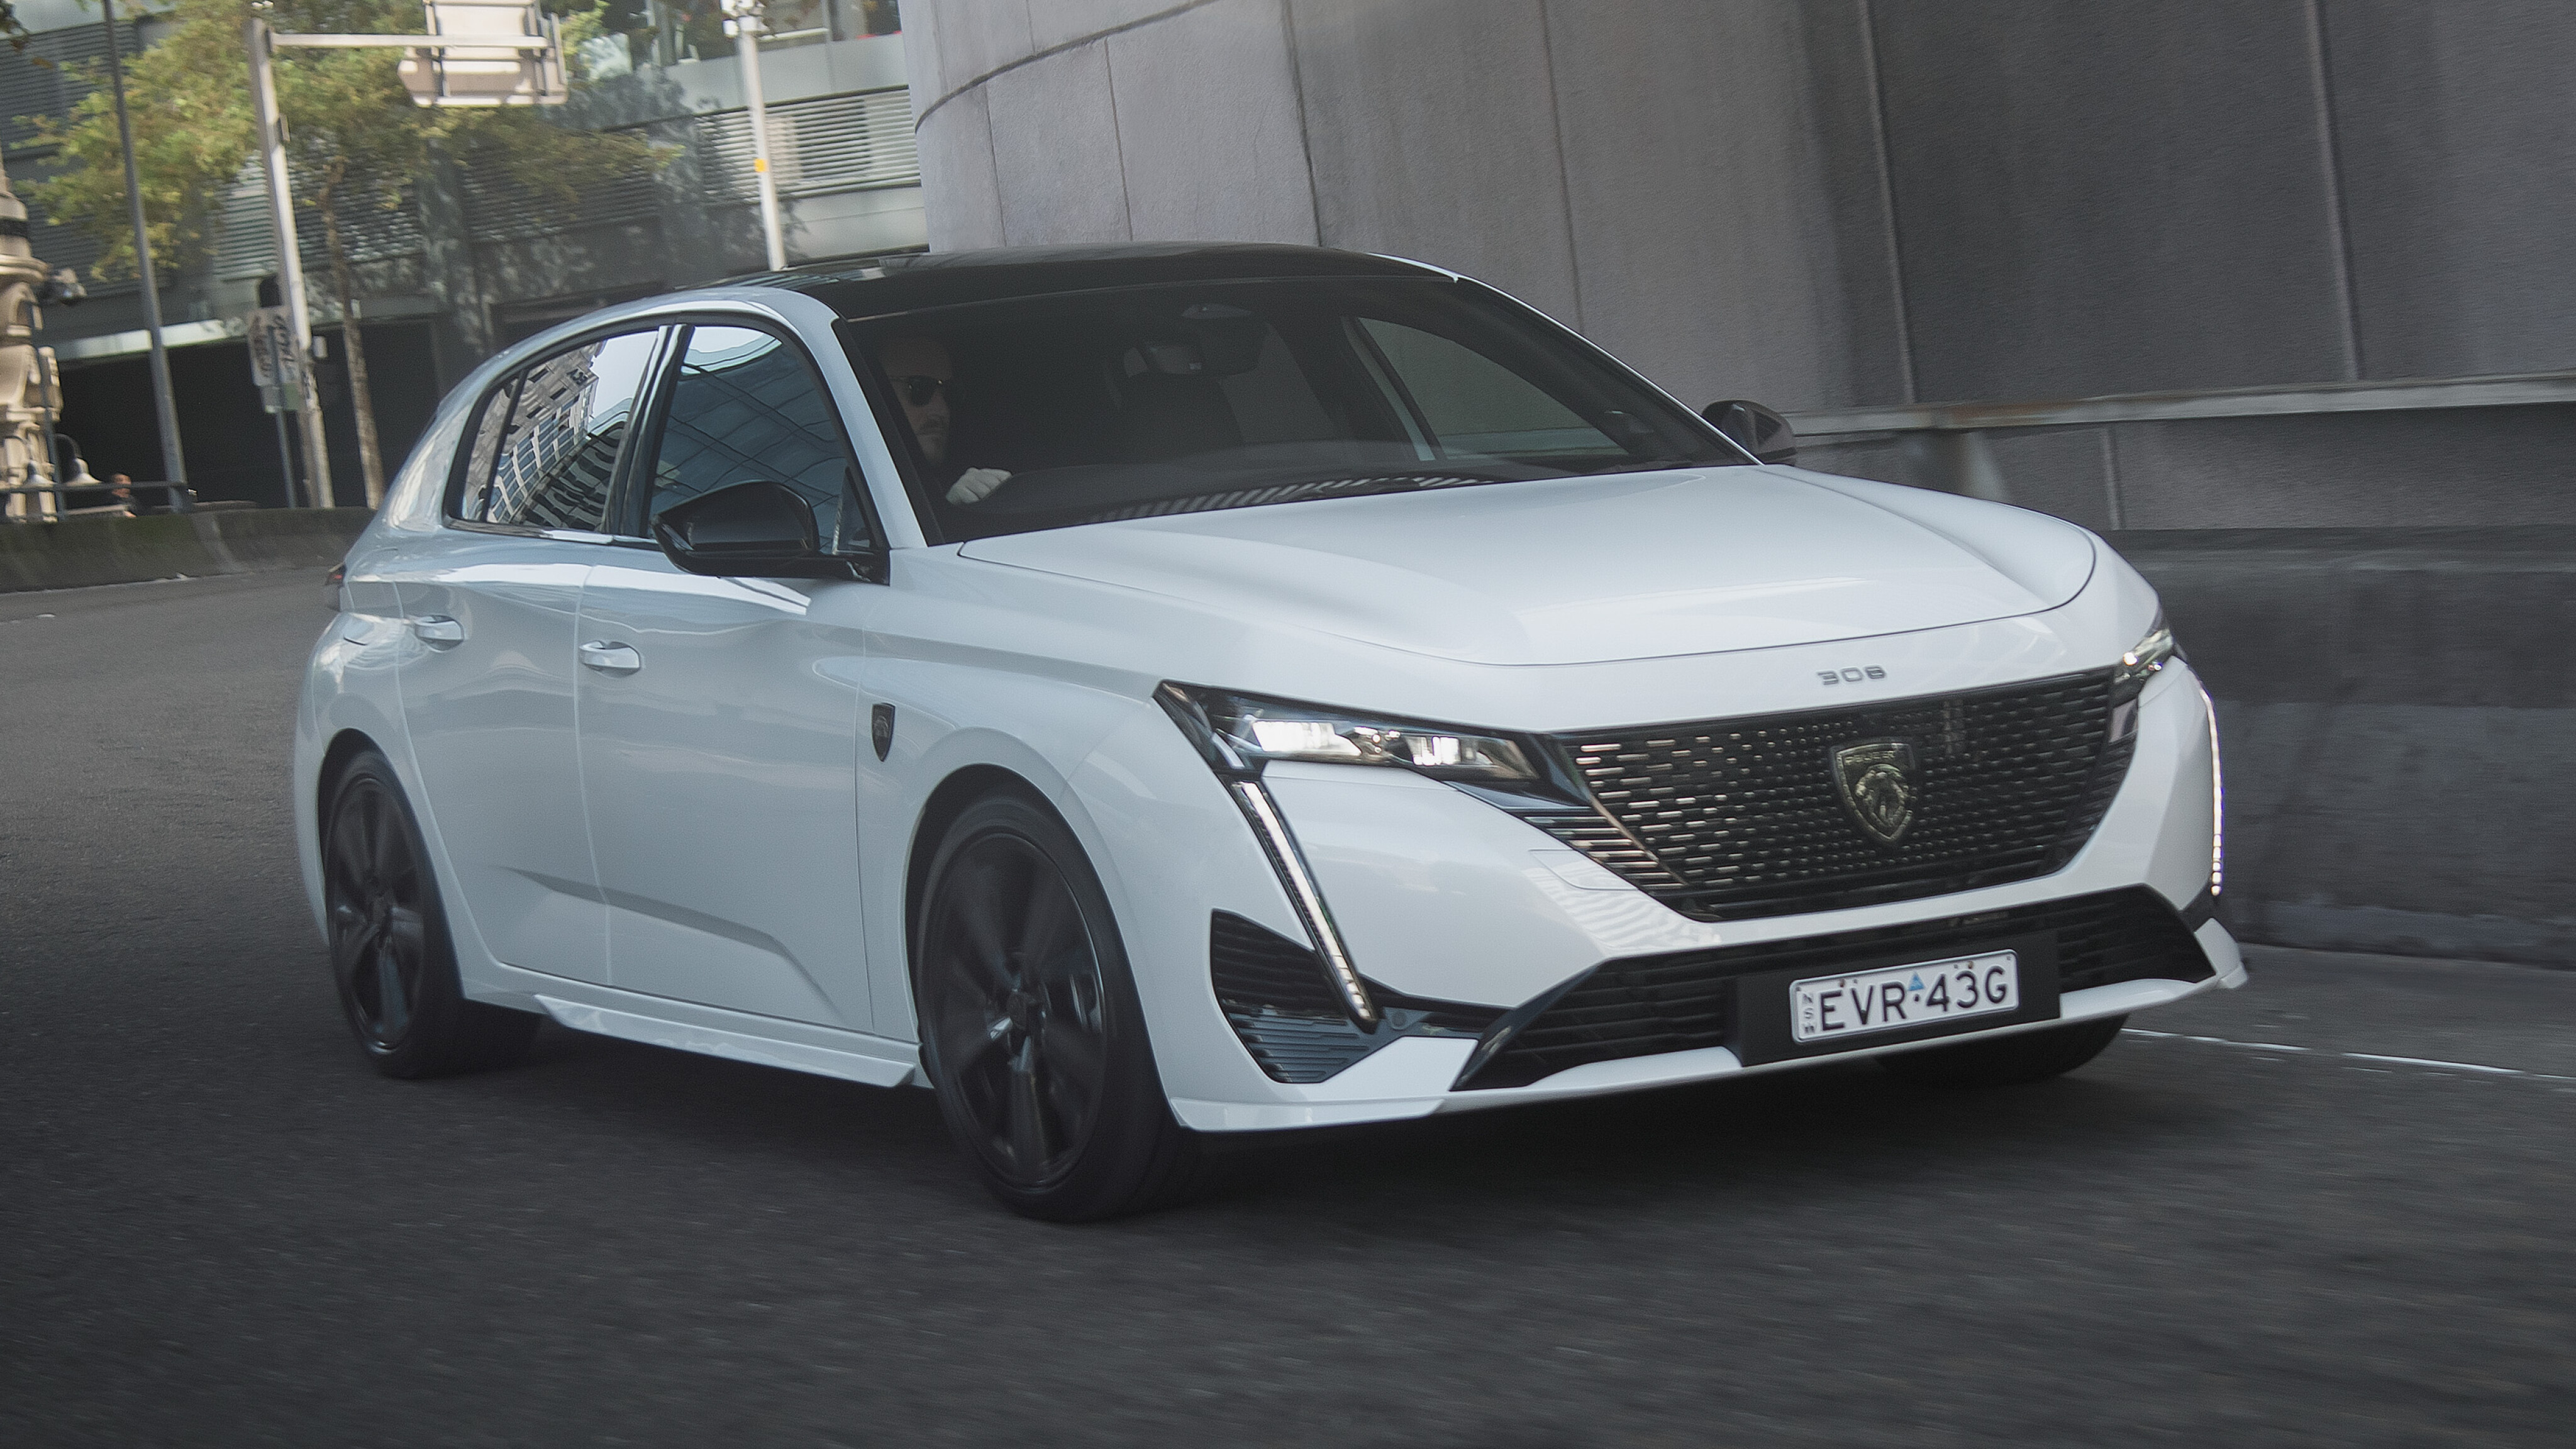 2023 Peugeot 308 pricing and features: GT Sport PHEV arrives